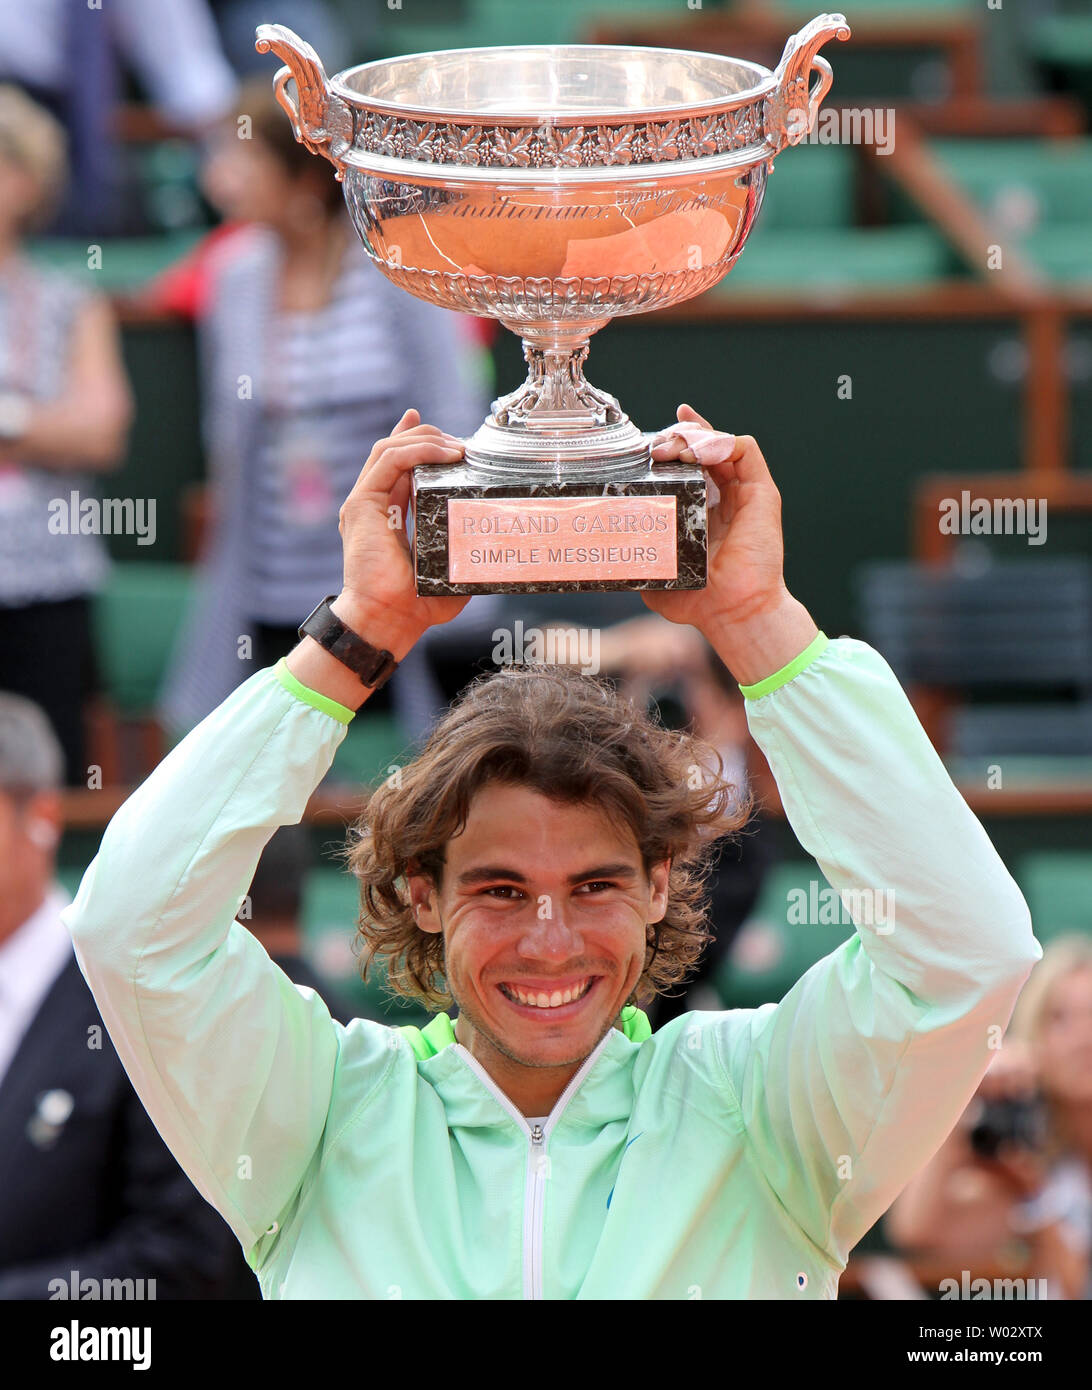 Spaniard Rafael Nadal holds the championship trophy after winning his  French Open men's final match against Swede Robin Soderling at Roland  Garros in Paris on June 6, 2010. Nadal defeated Soderling 6-4,